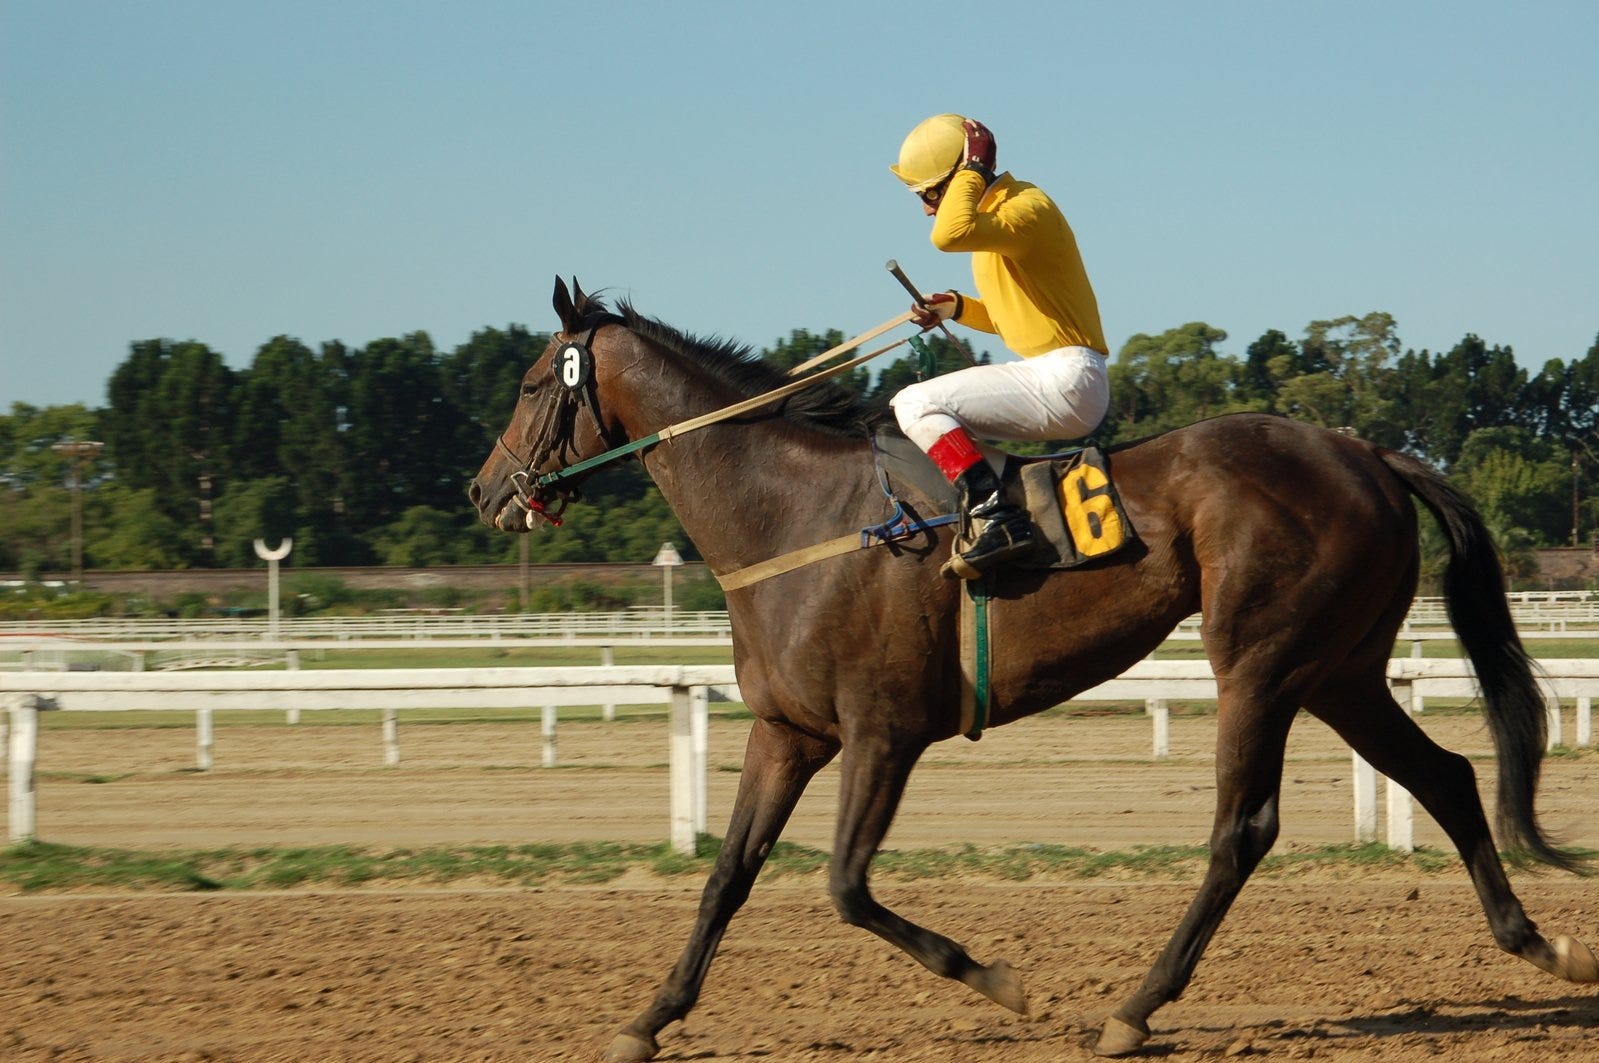 Online horse racing wagering sites